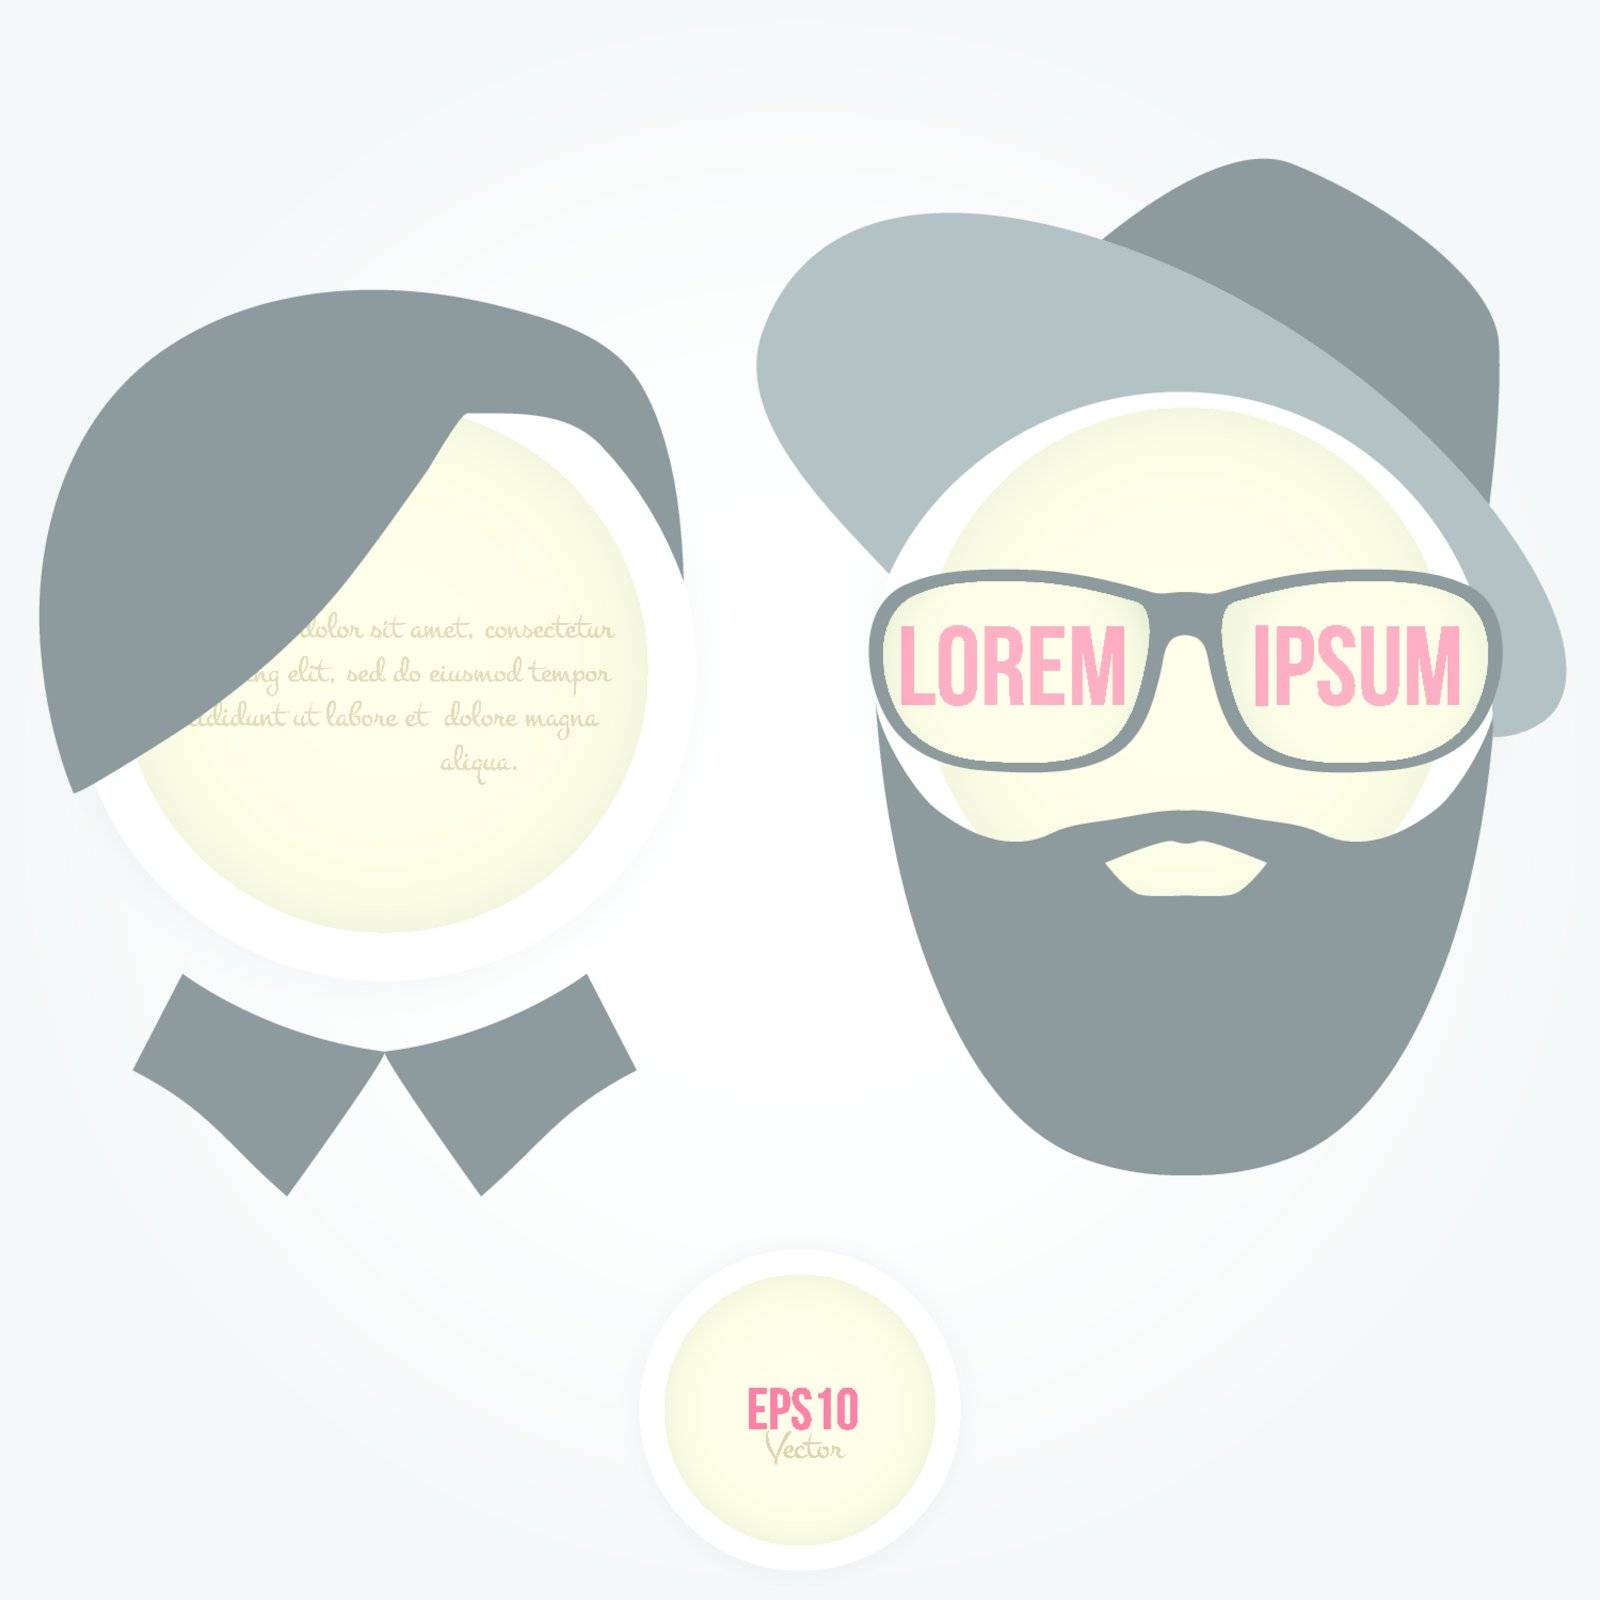 Hipster faces with glasses, beard, hat. Can be used for text, information, message or note